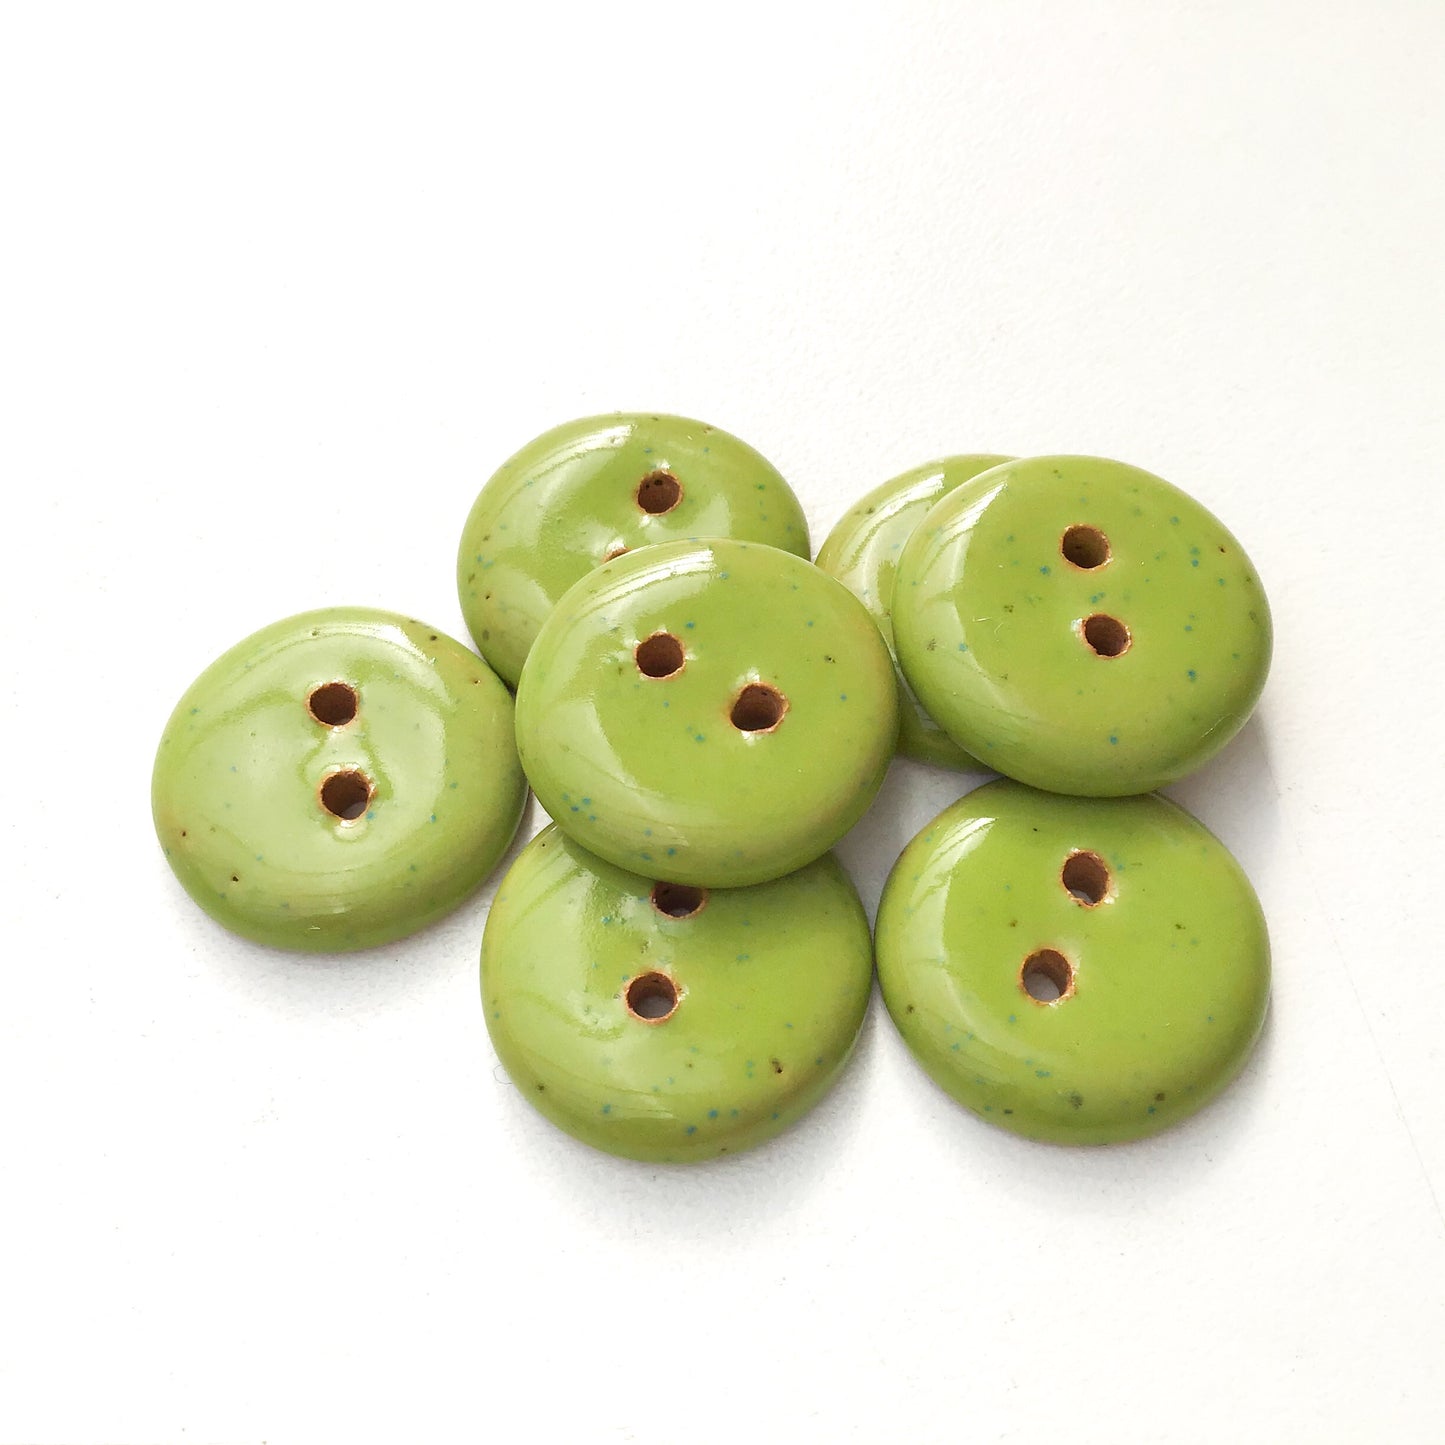 Speckled Apple Green Ceramic Buttons - Bright Green Clay Buttons - 3/4" - 7 Pack (ws-202)